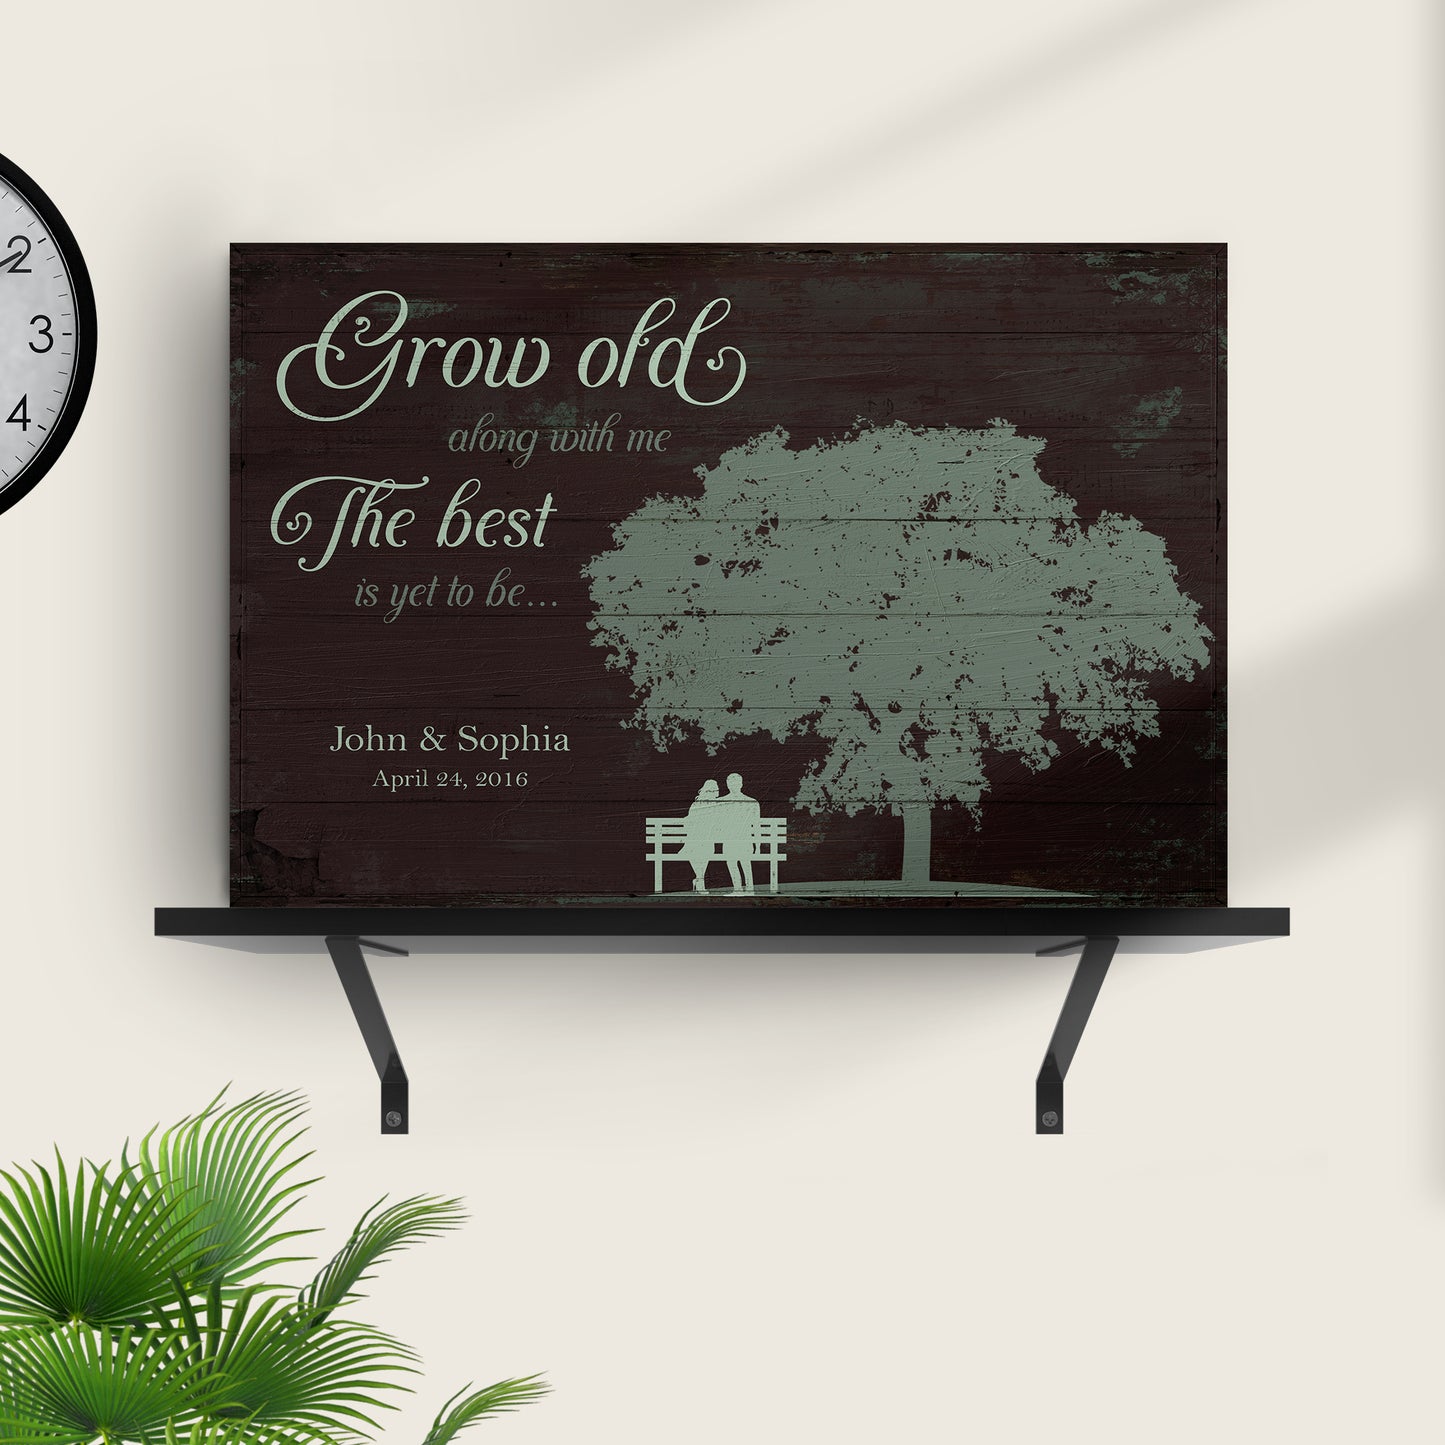 Grow Old Along With Me, The Best Is Yet To Be Sign Style 2 - Image by Tailored Canvases